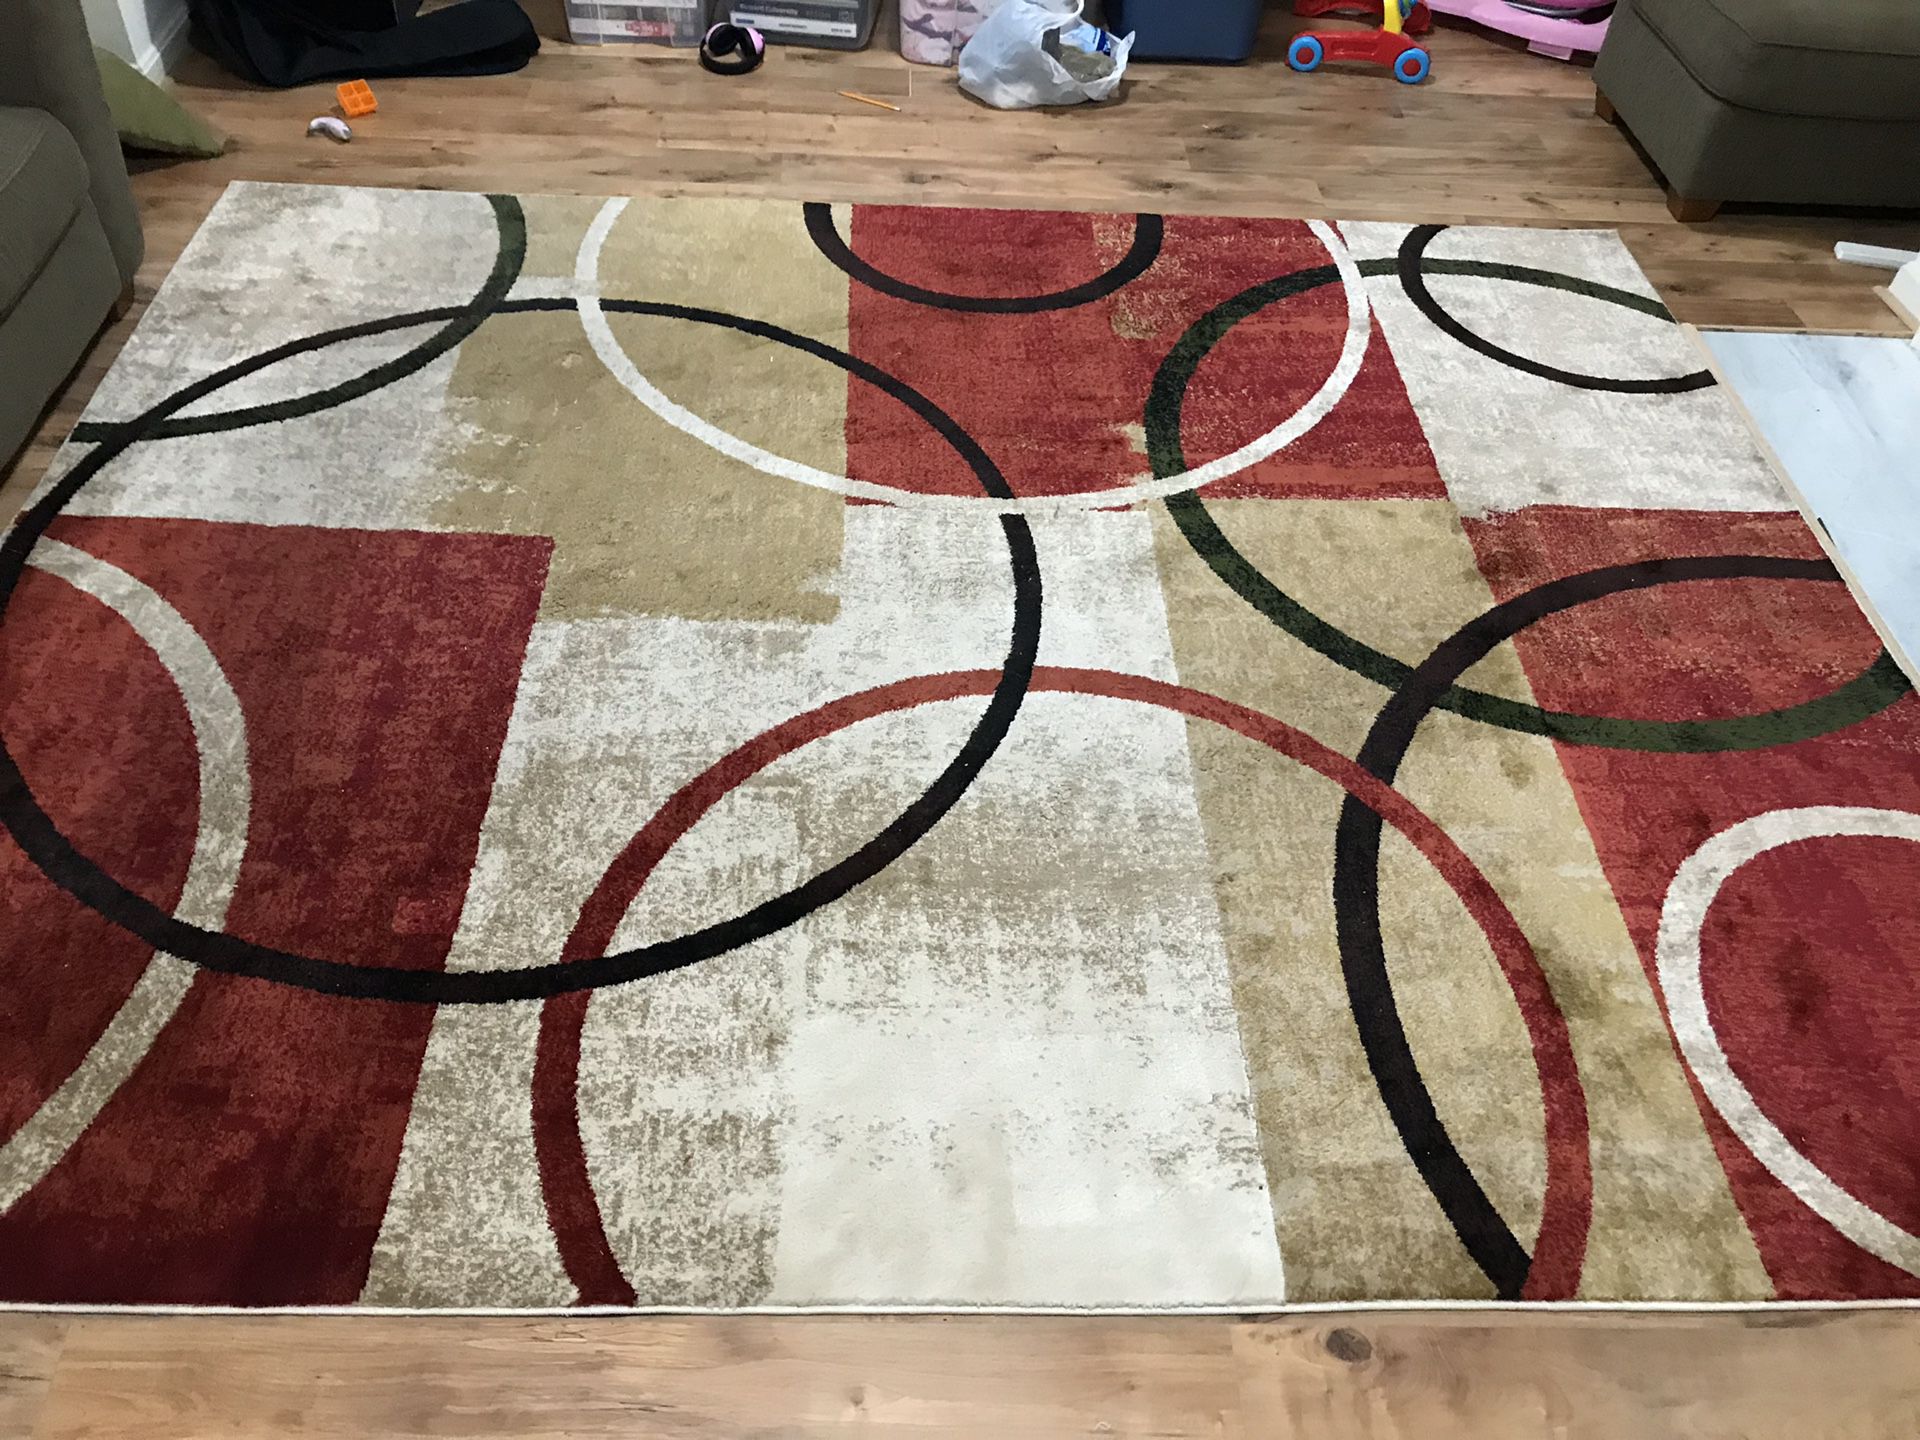 MOVING SALE!!! MUST GO BY 11/21! HUGE AREA RUG